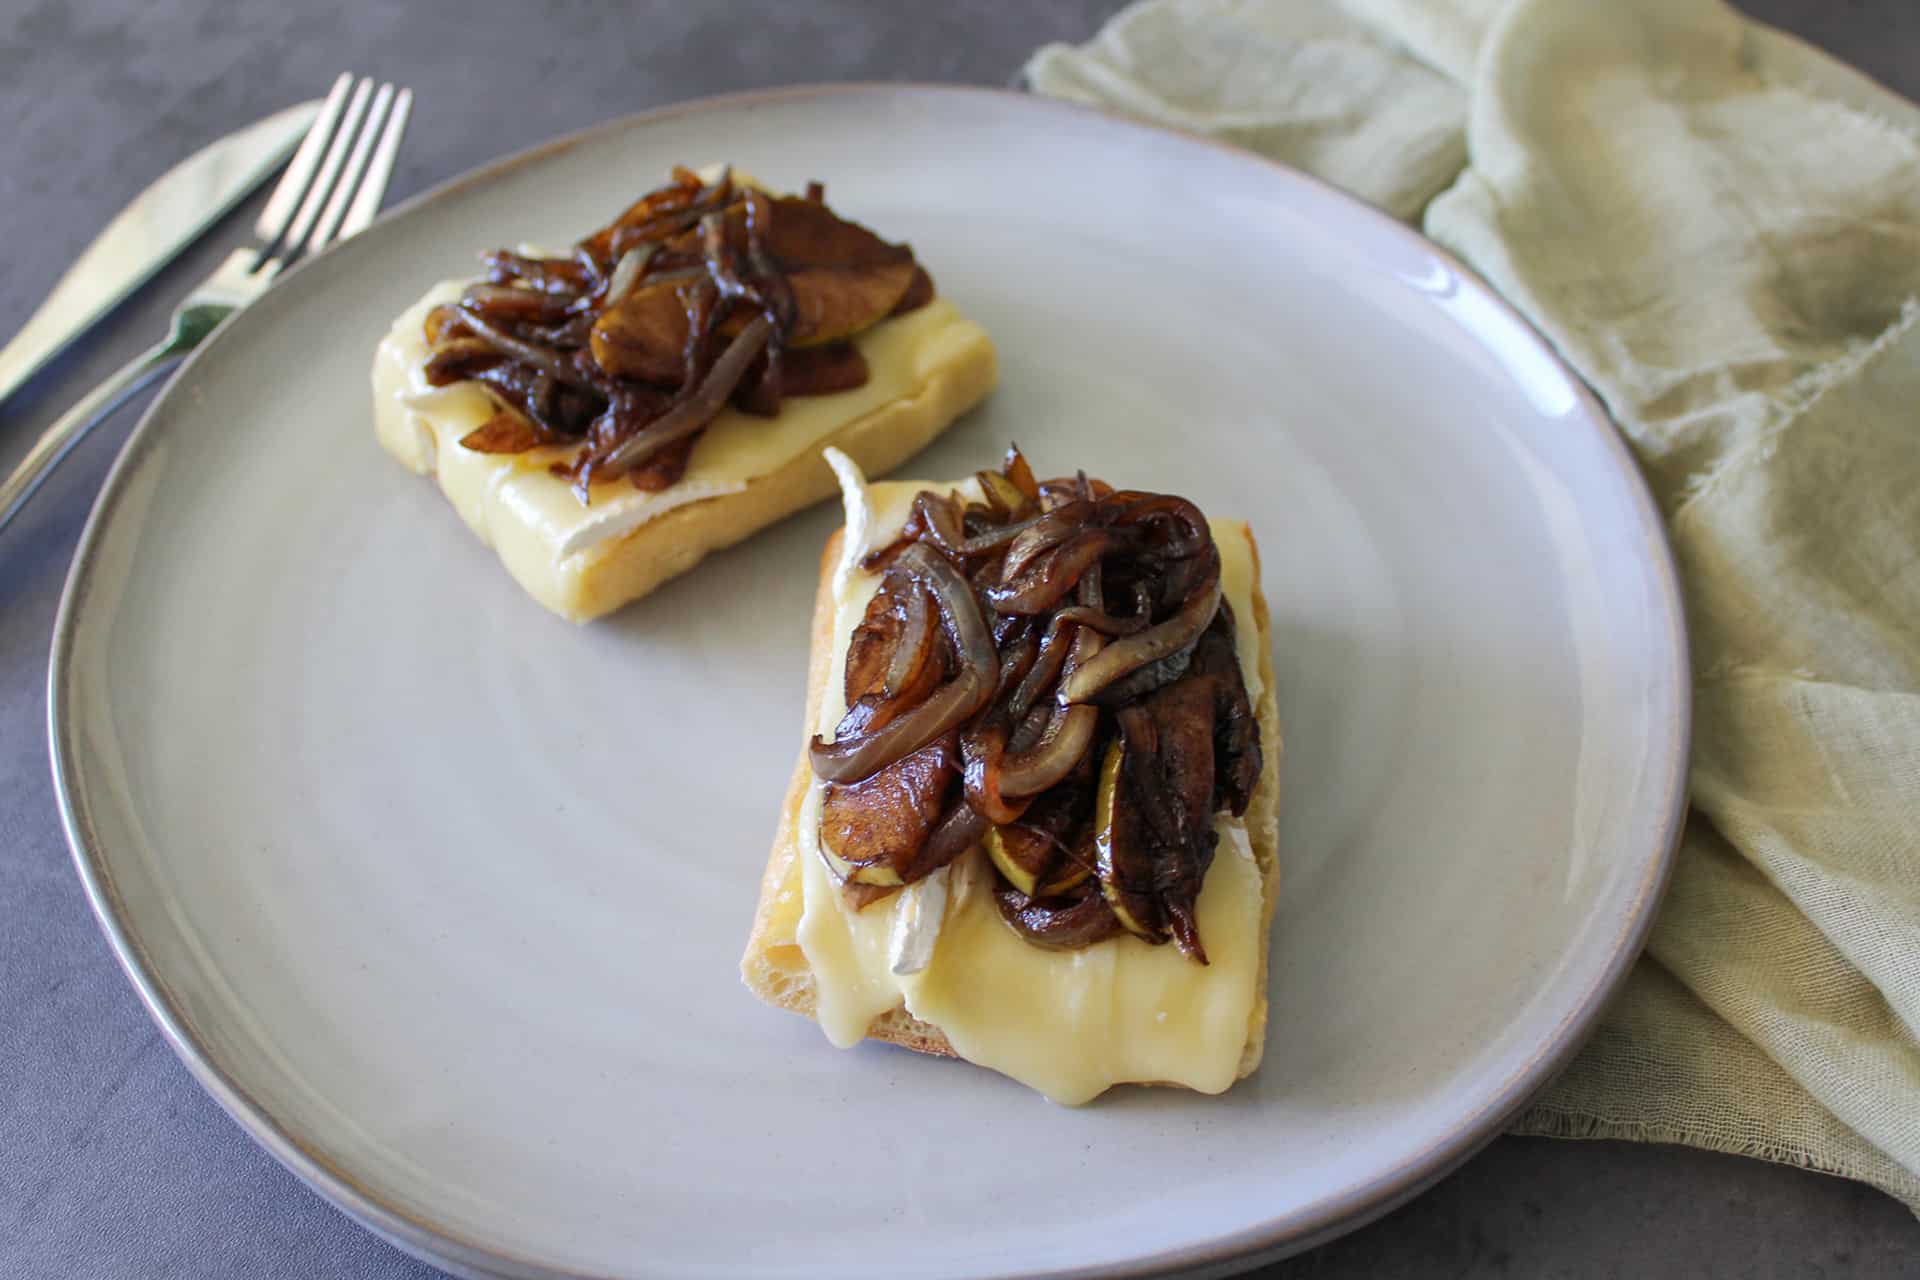 An open faced brie sandwich with balsamic caramelized onions and apple